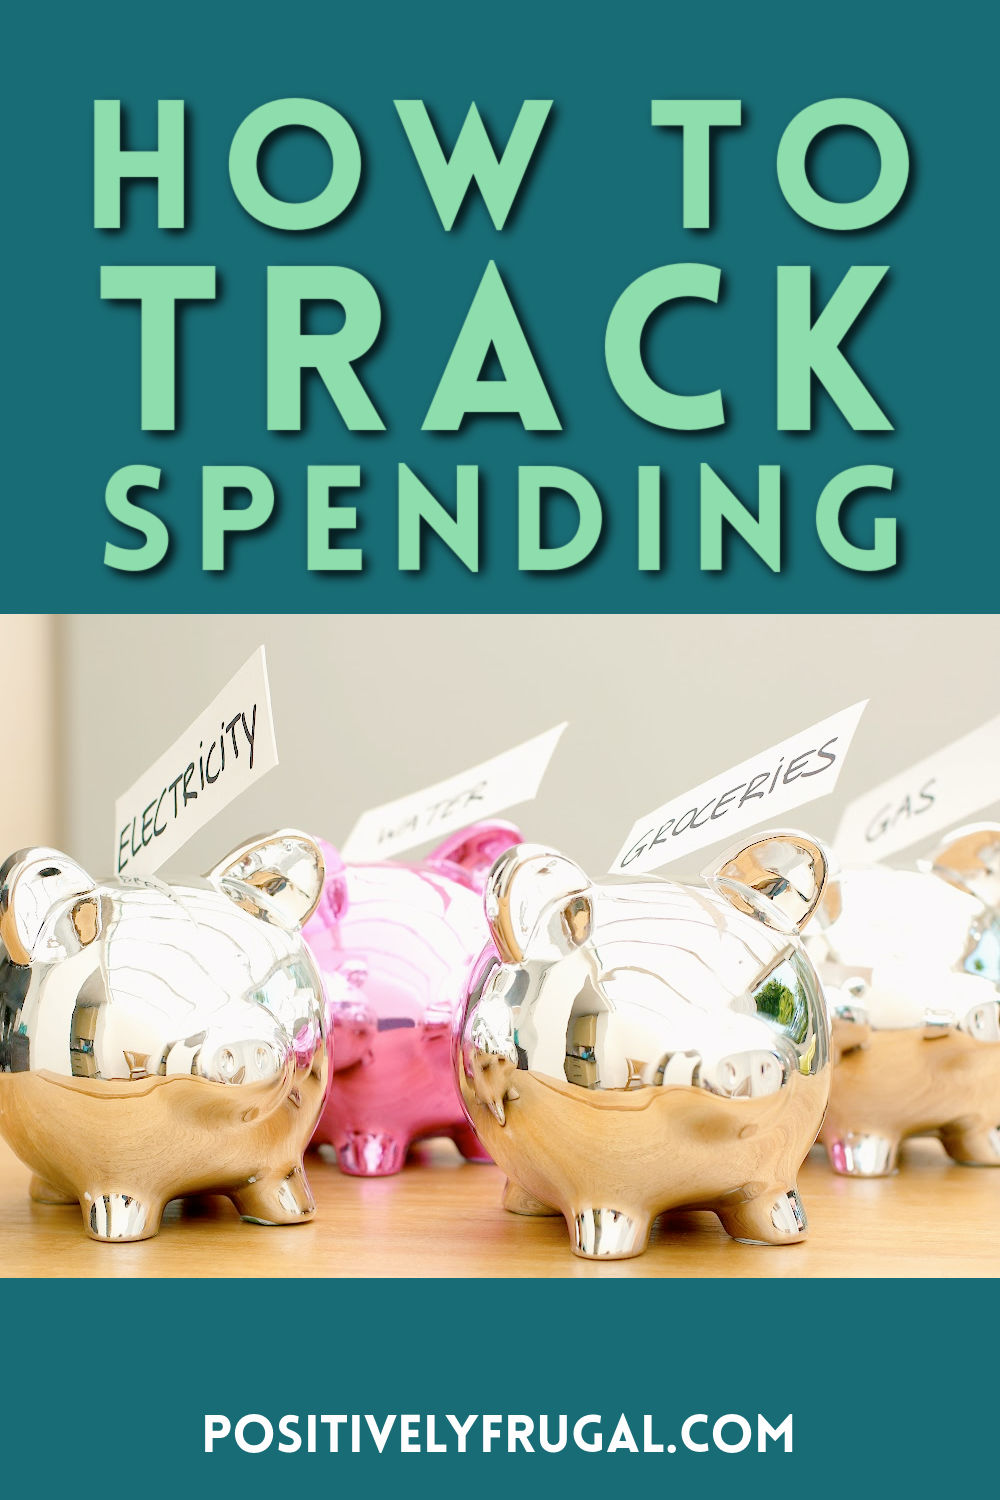 How To Track Spending by PositivelyFrugal.com